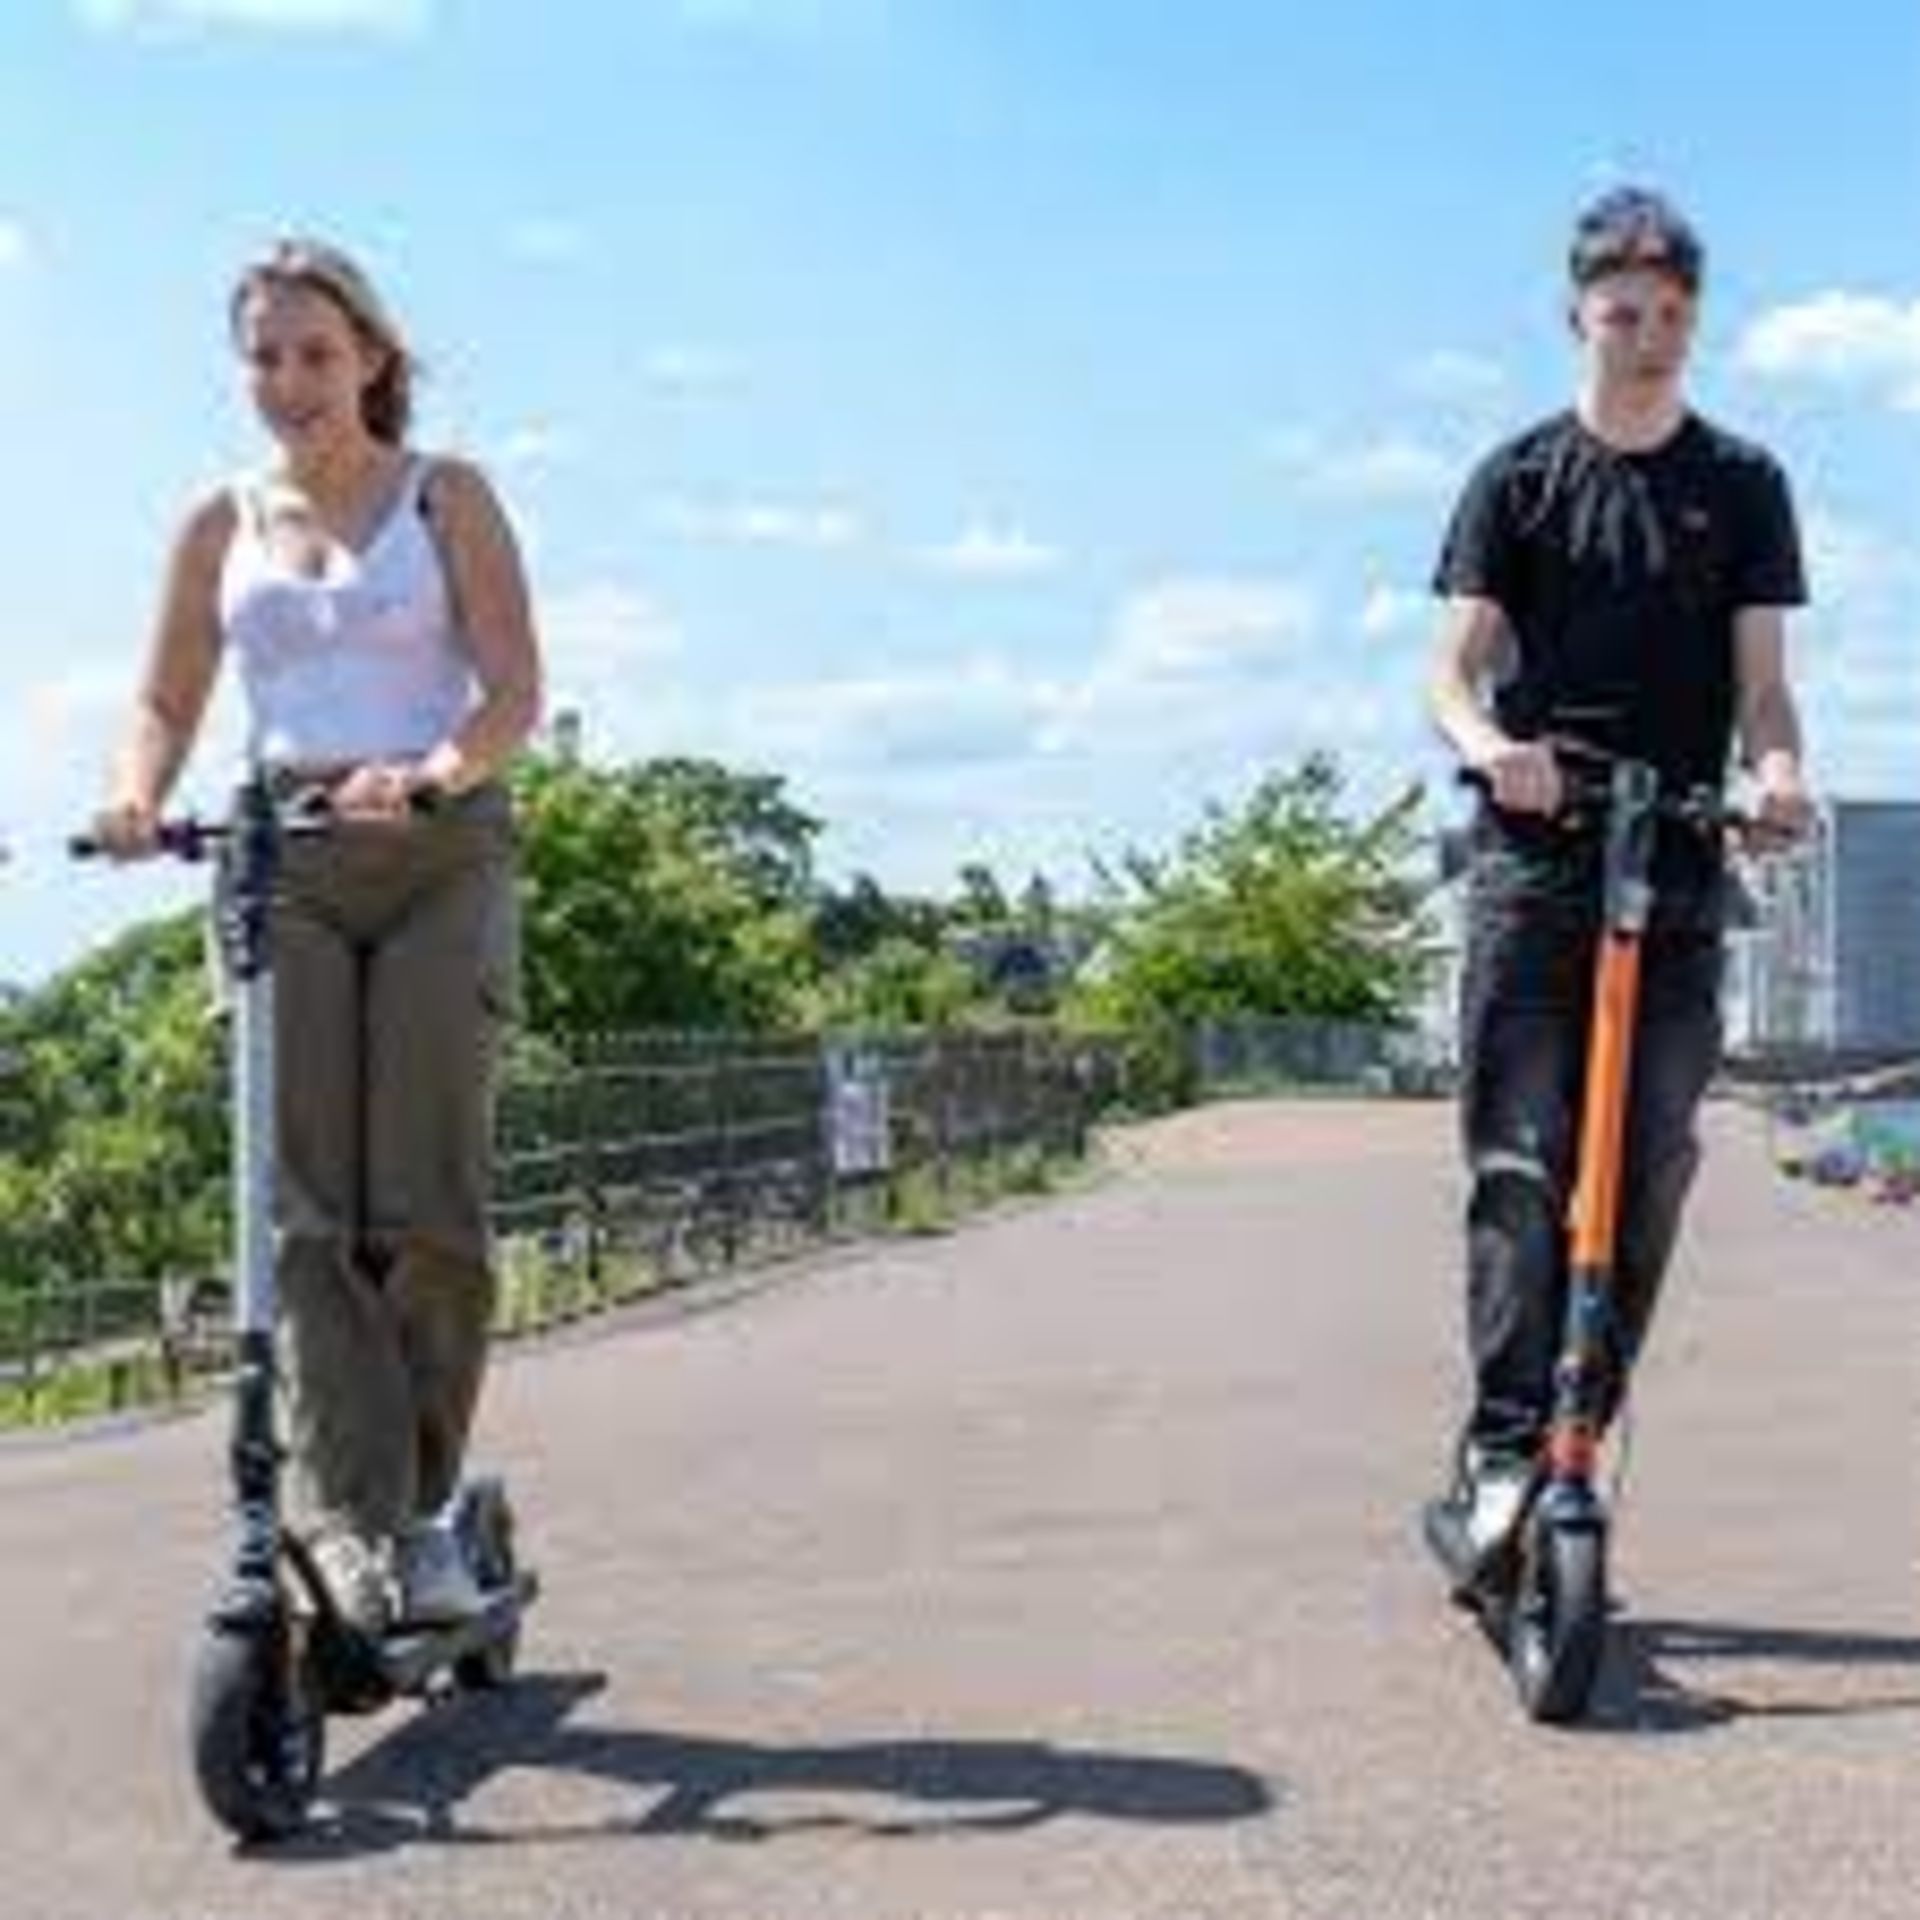 Brand New E-Glide V2 Electric Scooter Orange and Black RRP £599, Introducing a sleek and efficient - Image 2 of 3